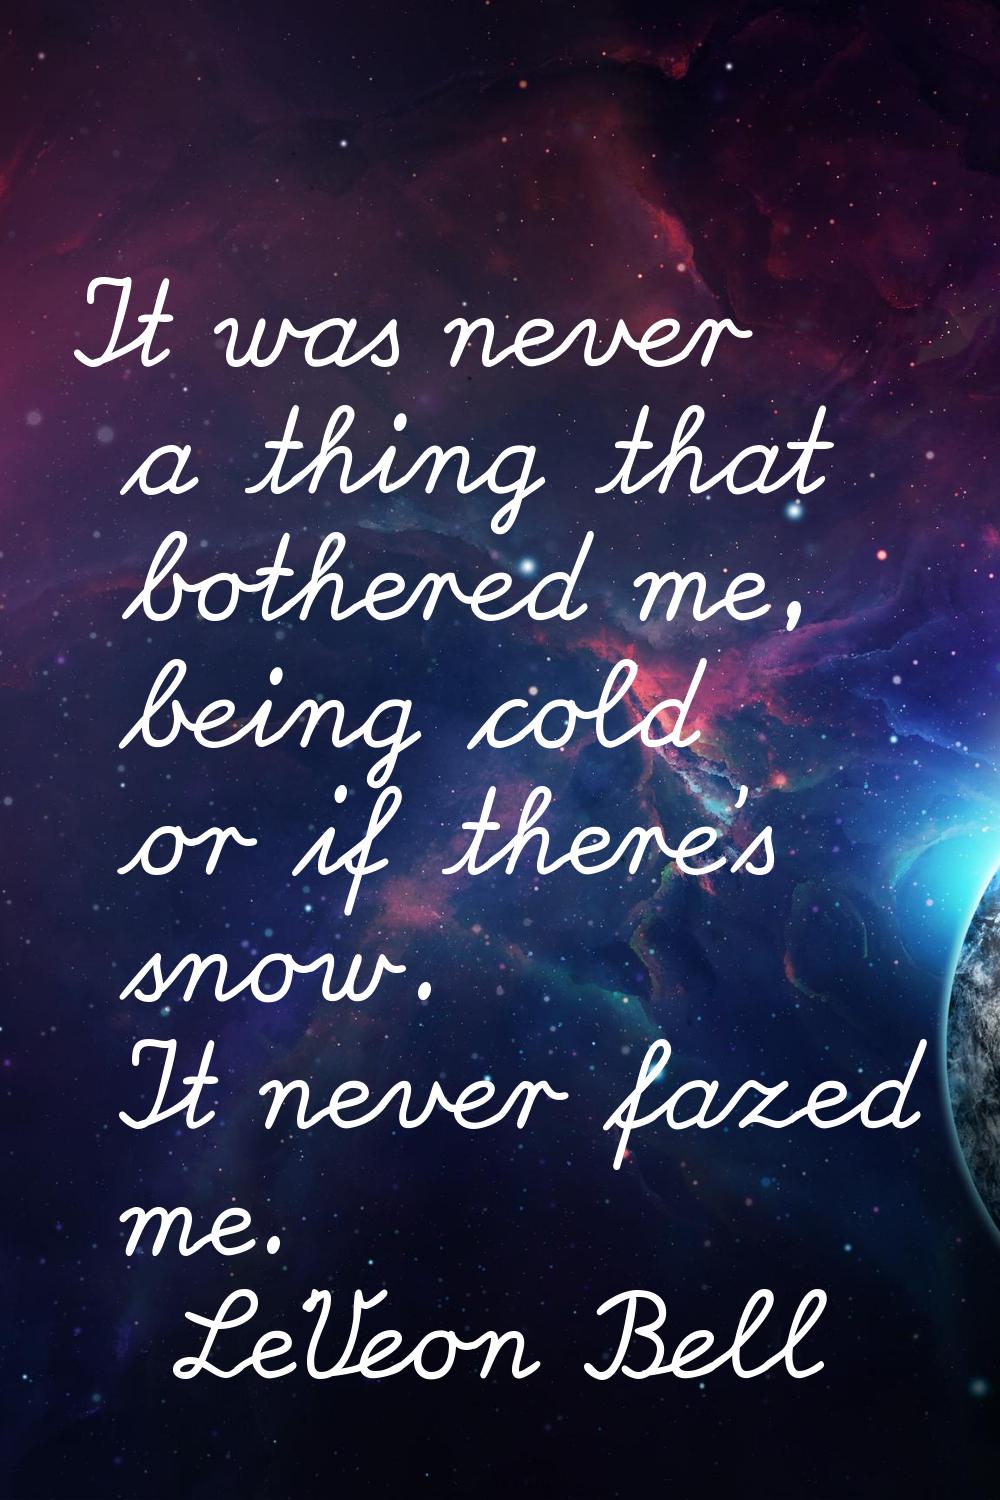 It was never a thing that bothered me, being cold or if there's snow. It never fazed me.